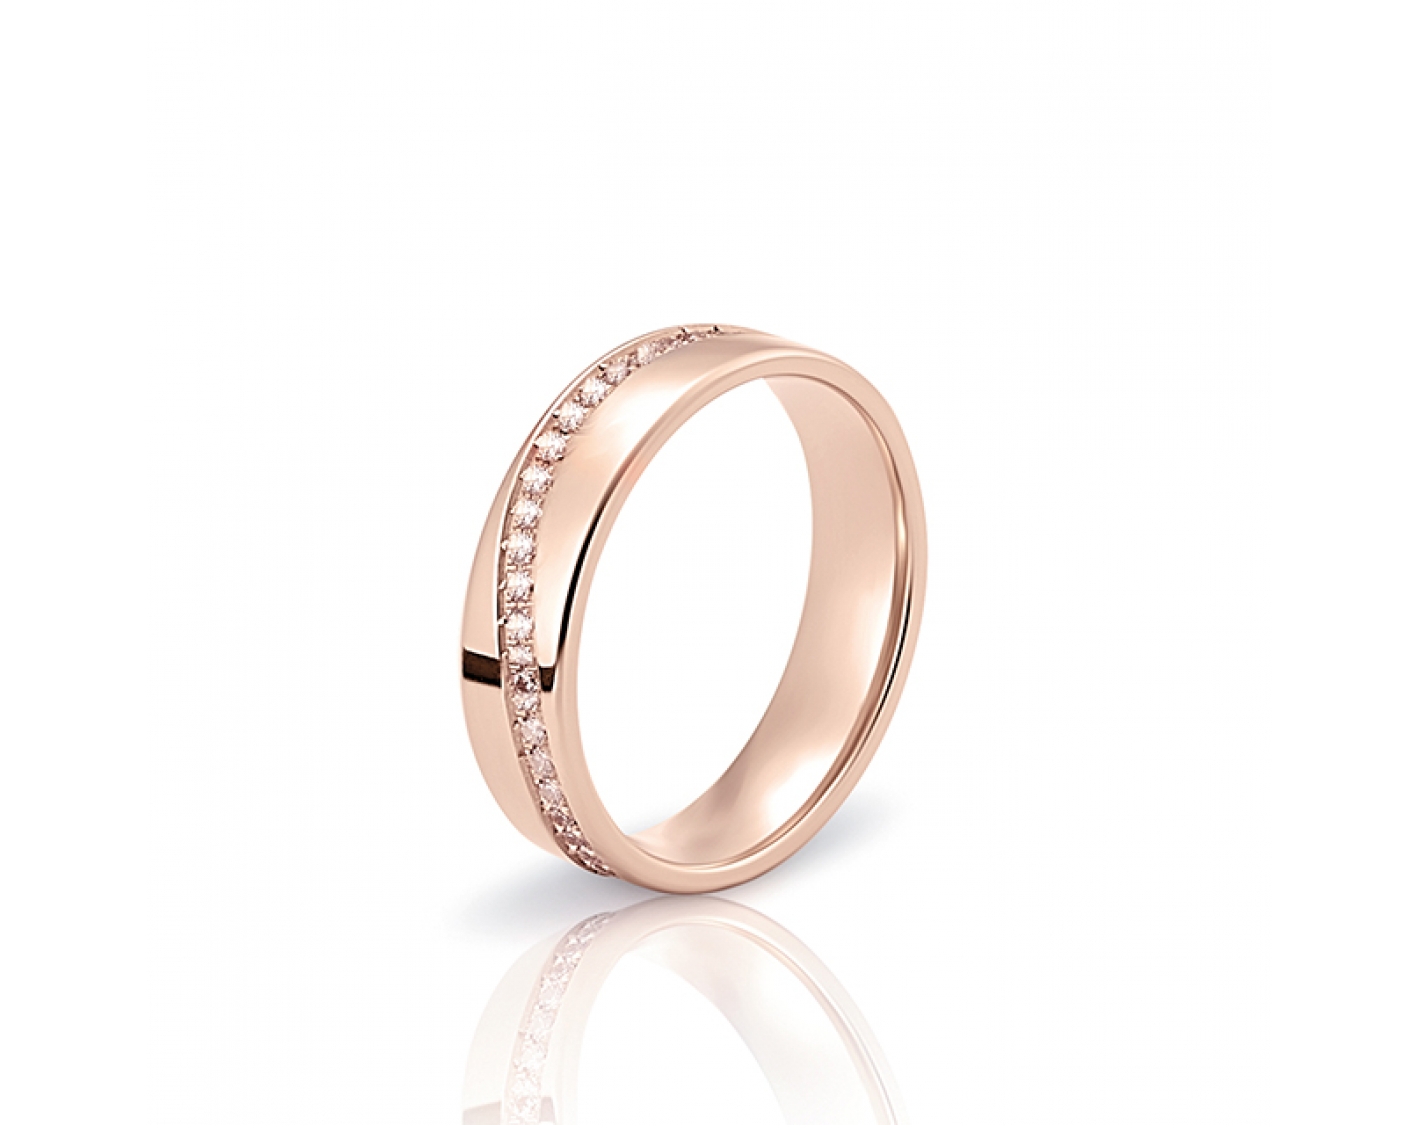 18k rose gold 5mm wedding band full setted with diamonds